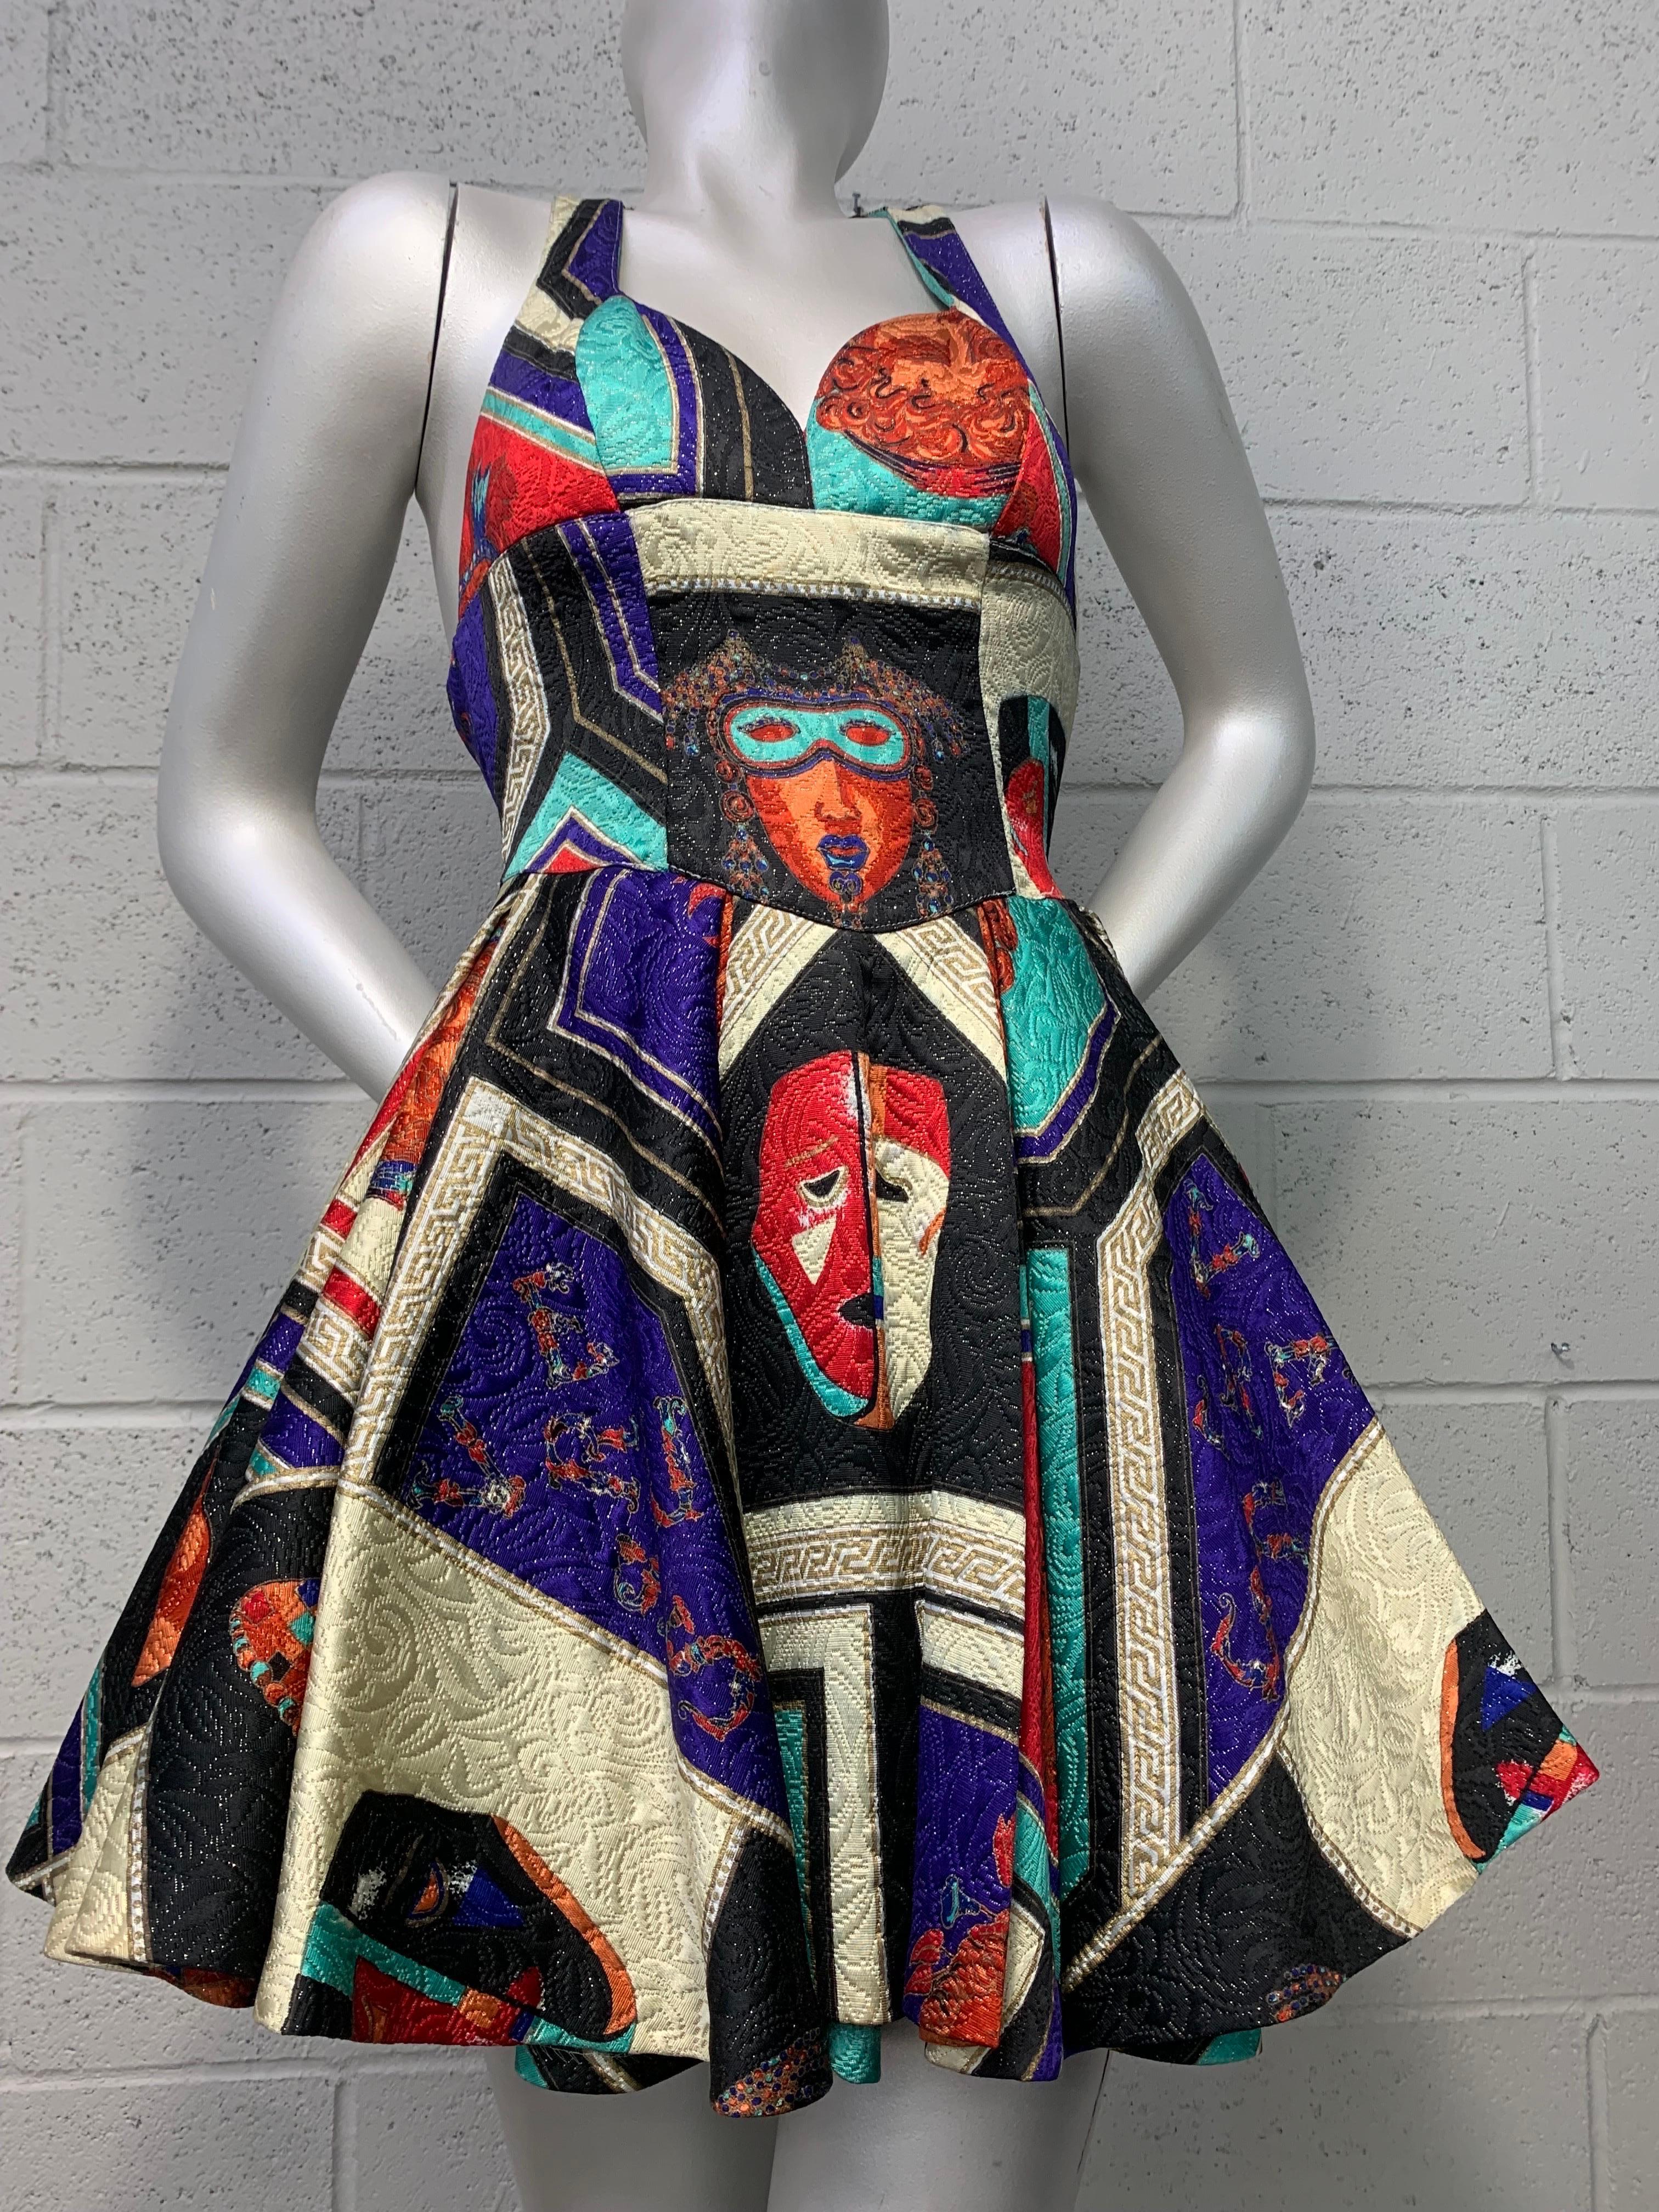 A 1992 Versus by Gianni Versace 1950s and masquerade-inspired matelissé silk lamé fit and flare mini dress with gold lamé tulle crinoline under-skirt. Bold graphic mask imagery paired with arresting geometrics and color-blocking give this piece a